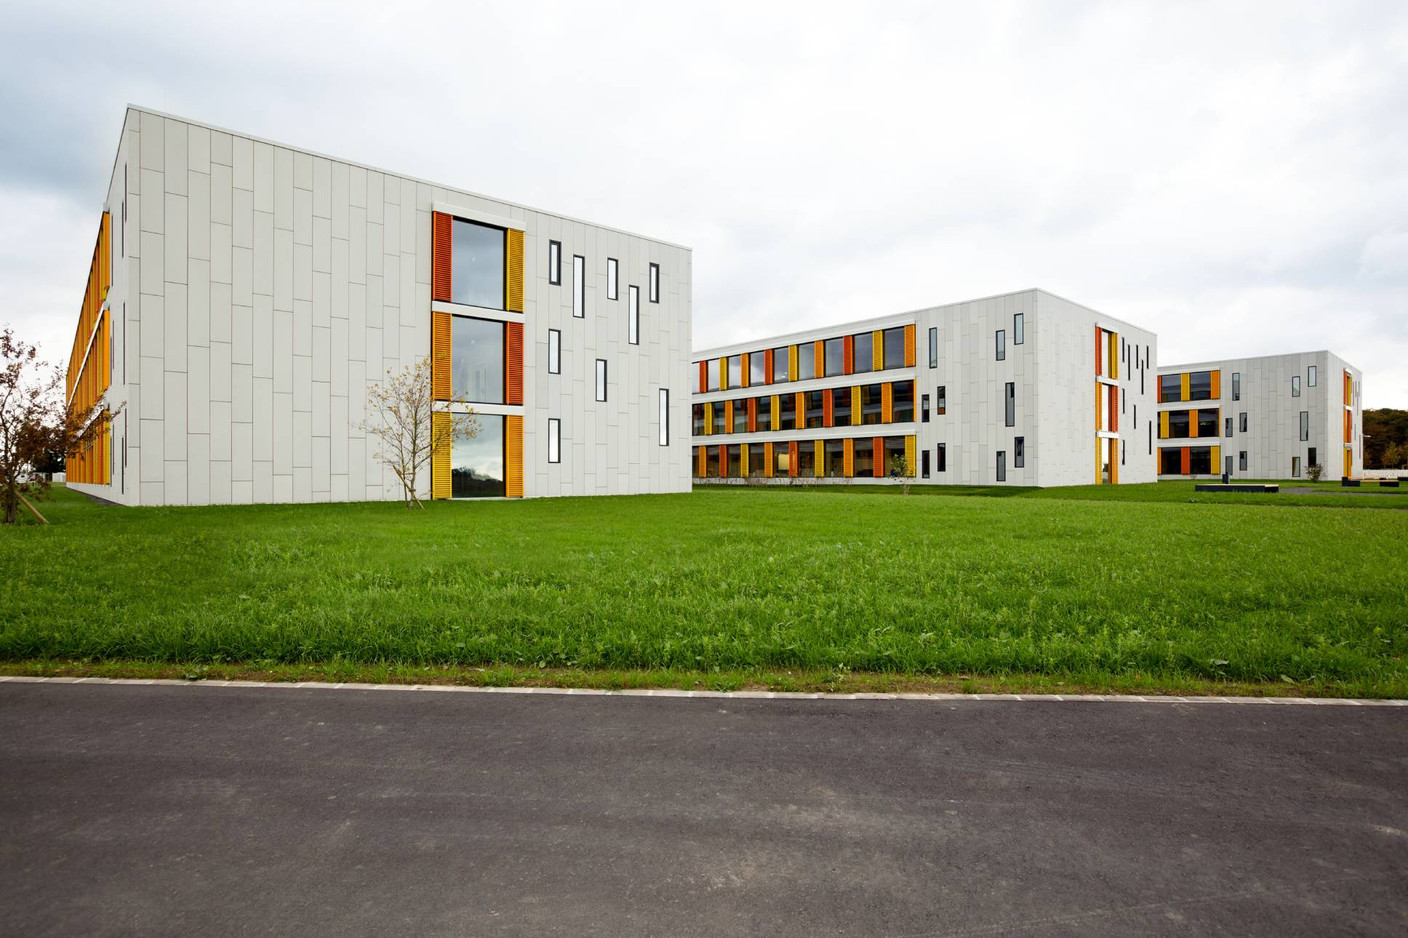 A secondary school in Junglinster, designed by G+P Muller. Photo: Julien Swol